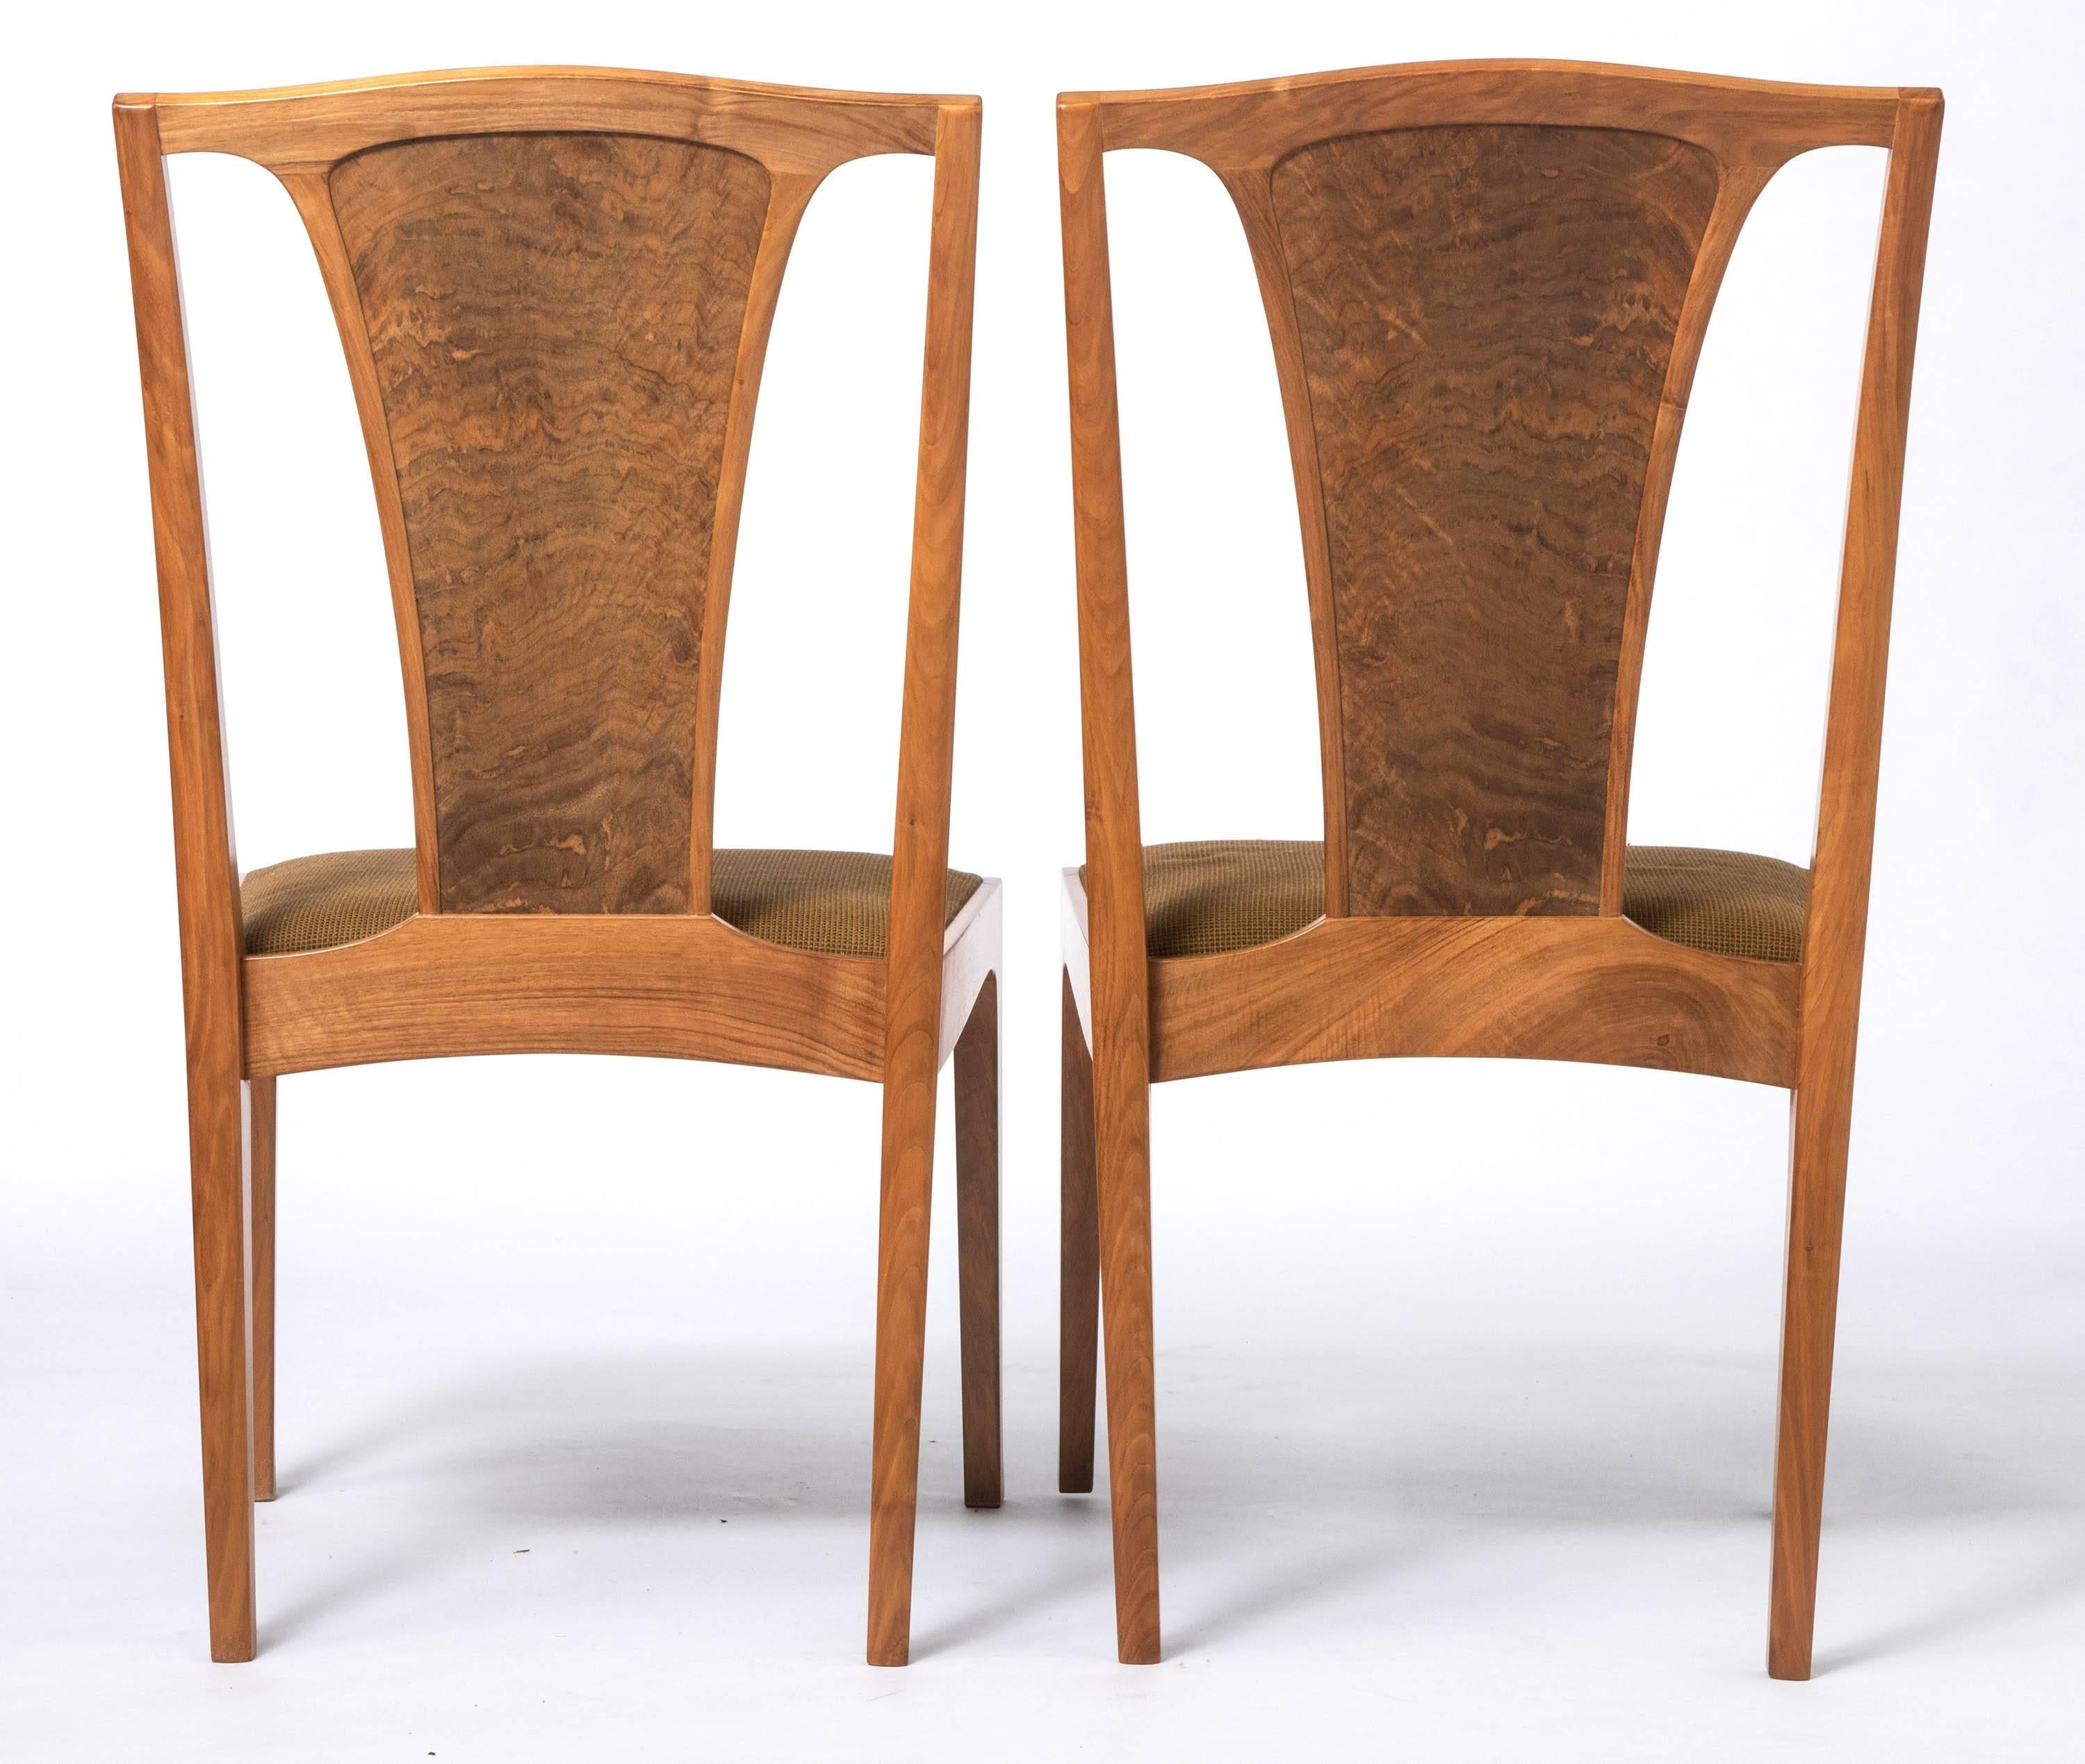 Pair of English Walnut Chairs by Edward Barnsley, England, circa 1969 For Sale 2